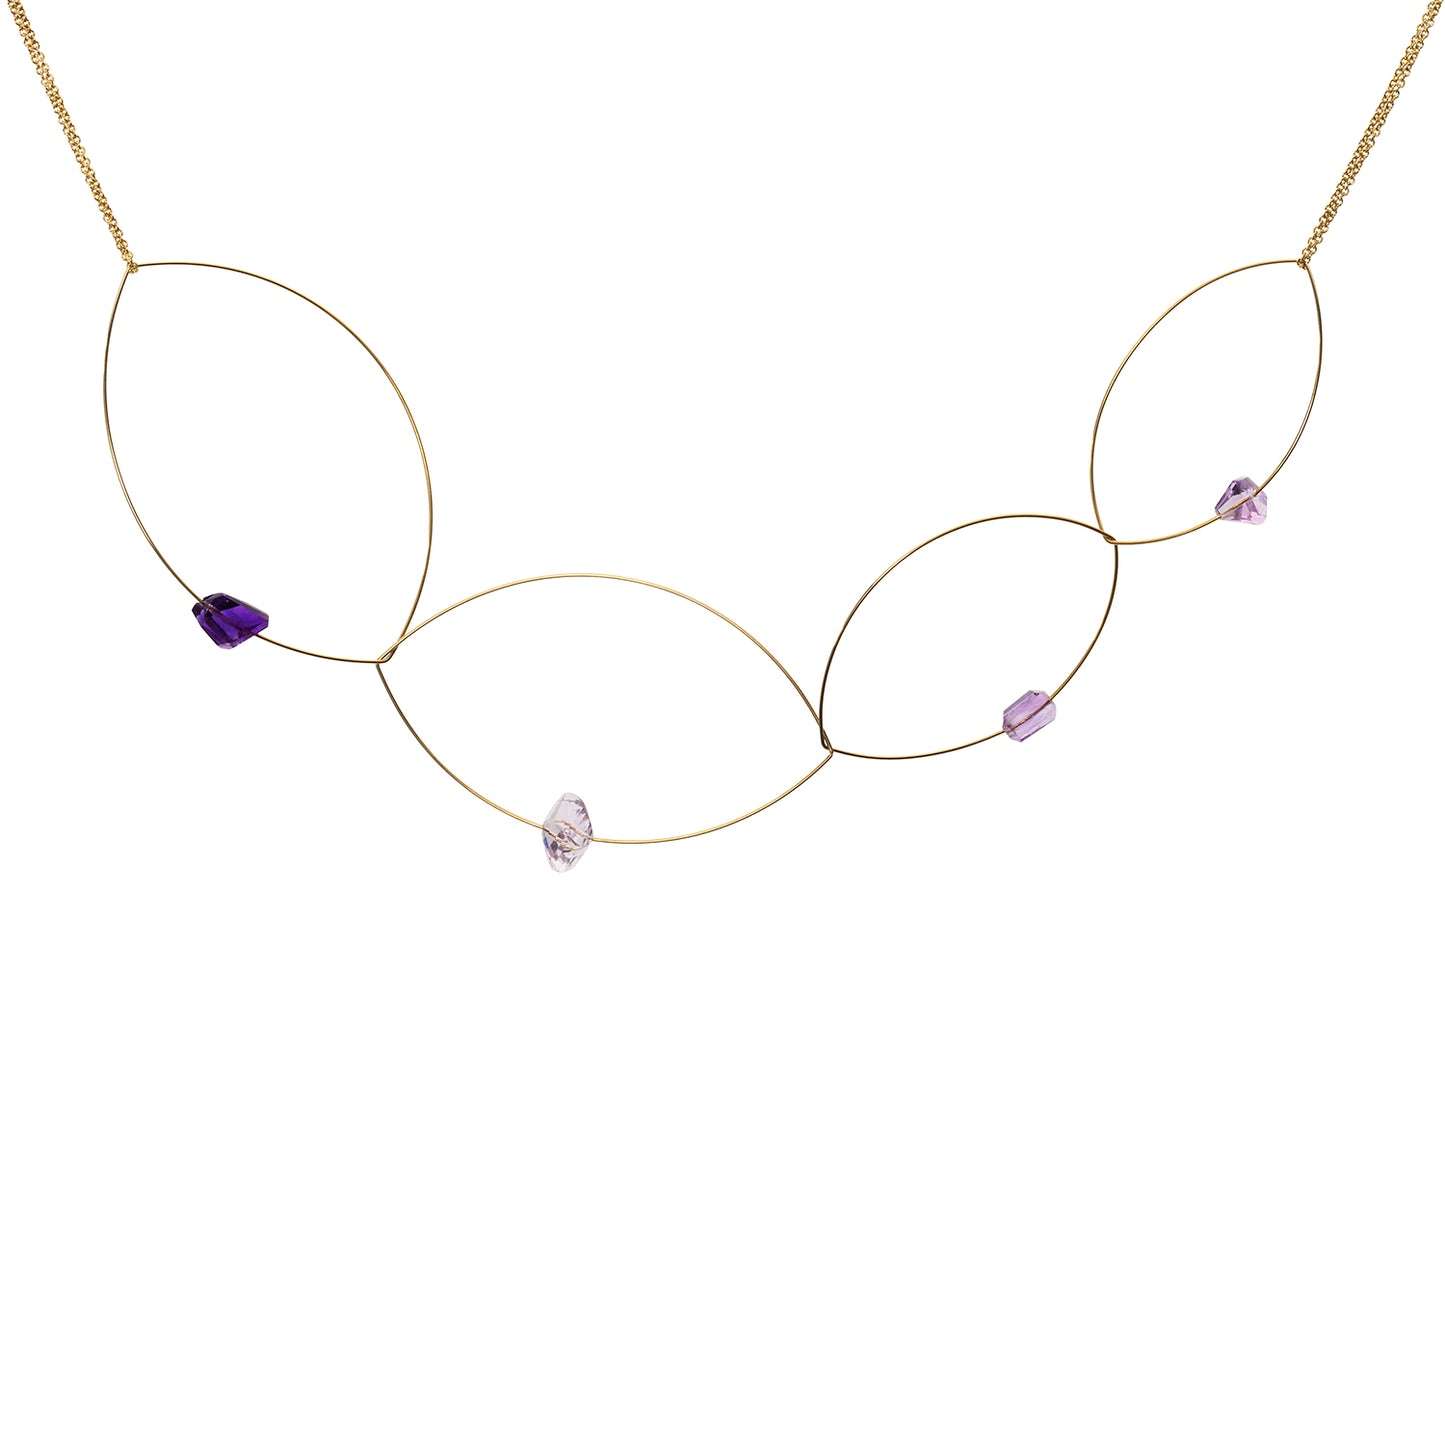 'Morph It!' Necklace with Amethyst